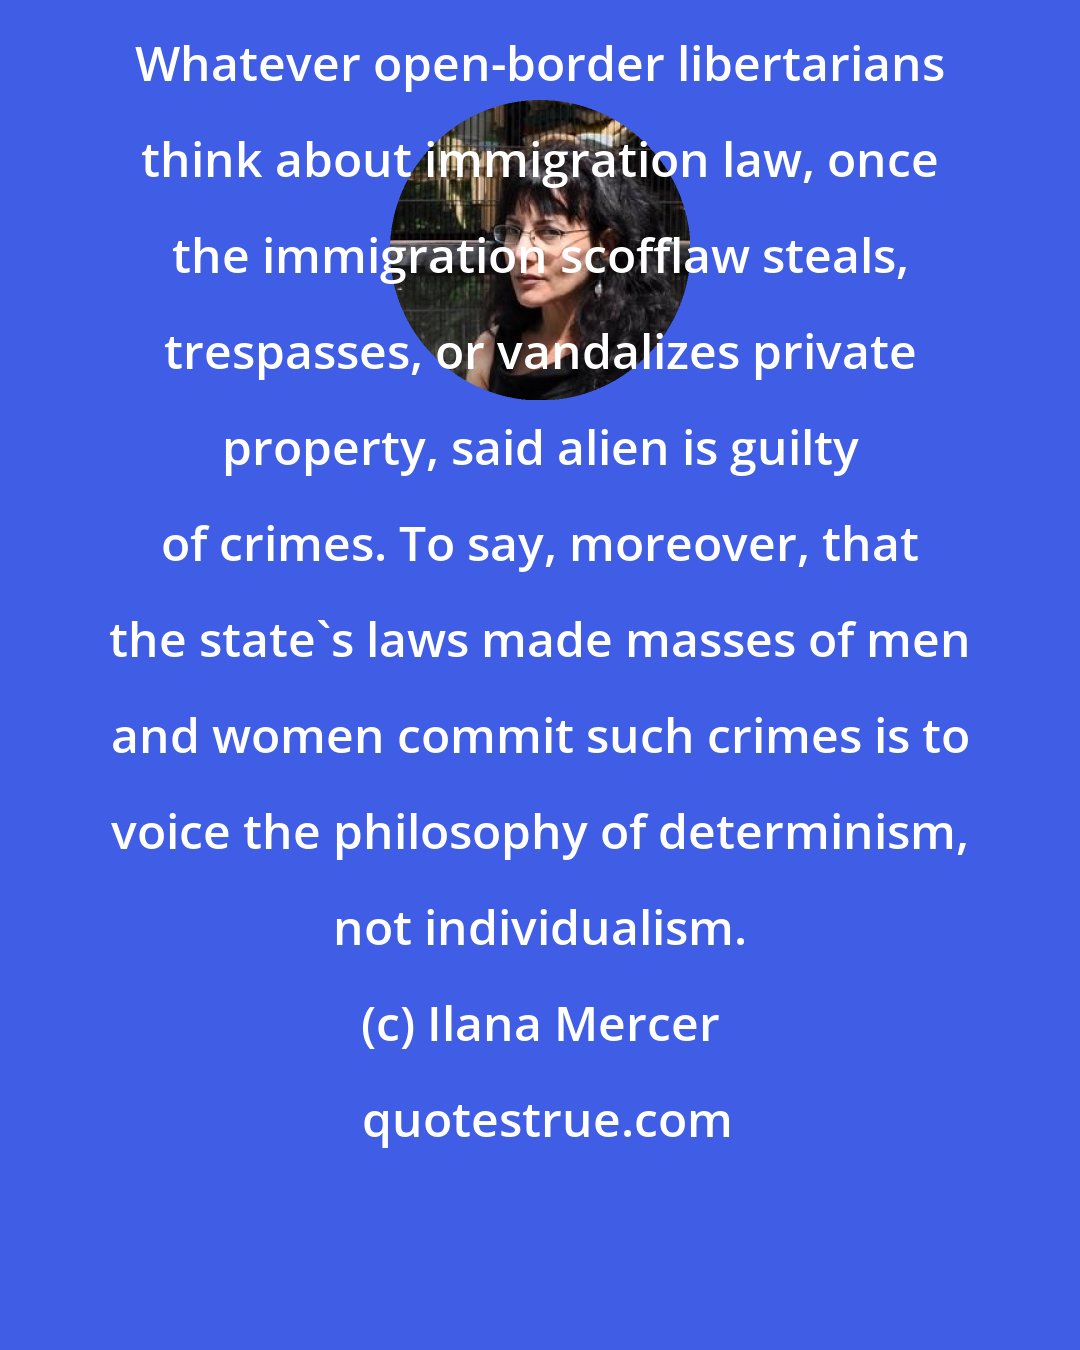 Ilana Mercer: Whatever open-border libertarians think about immigration law, once the immigration scofflaw steals, trespasses, or vandalizes private property, said alien is guilty of crimes. To say, moreover, that the state's laws made masses of men and women commit such crimes is to voice the philosophy of determinism, not individualism.